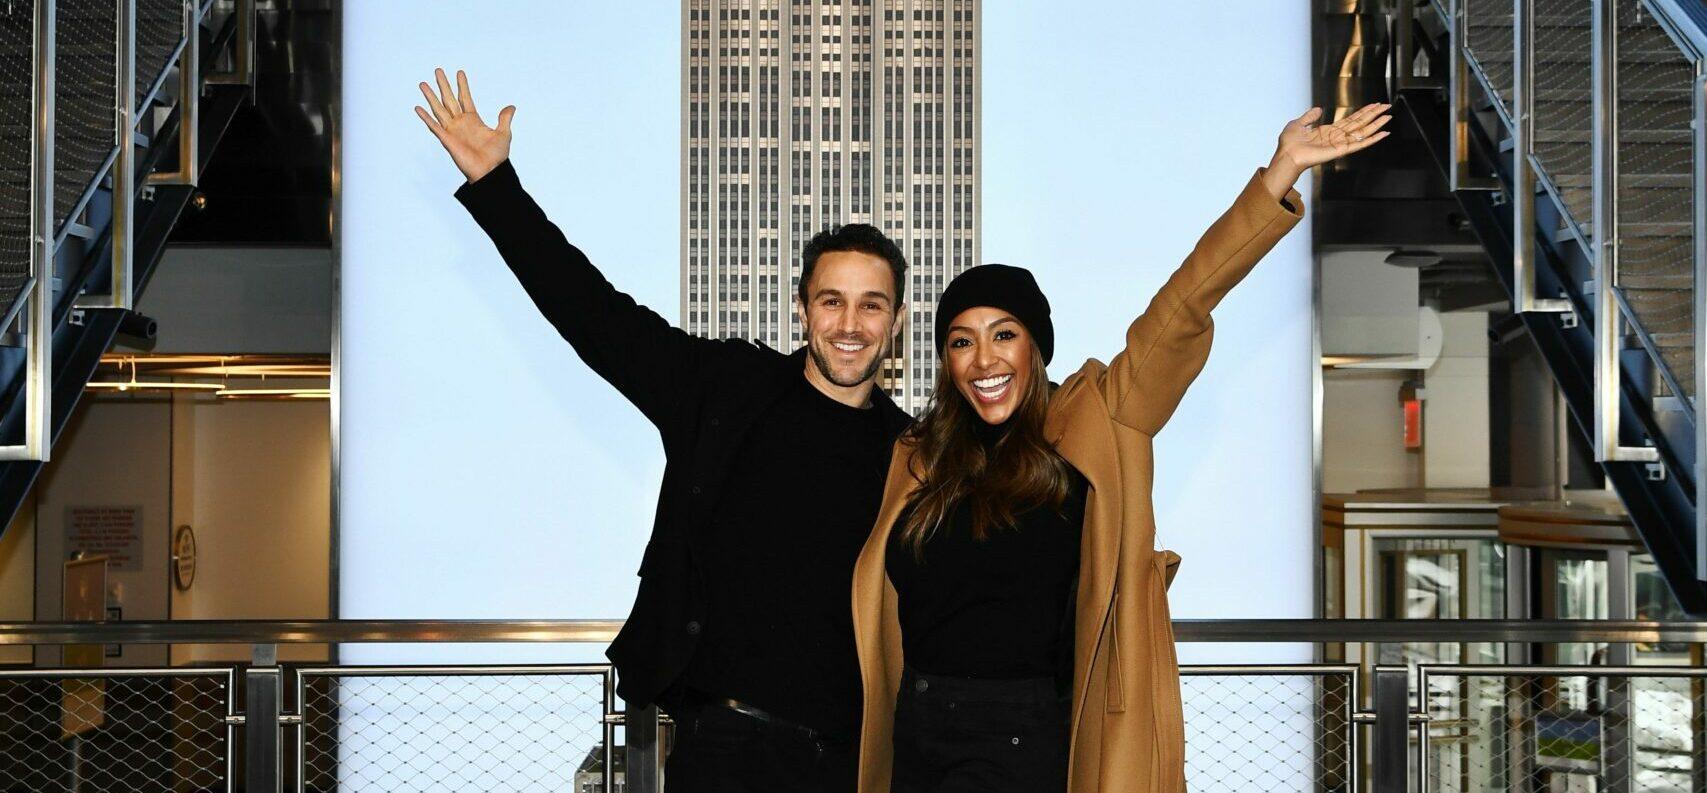 Tayshia Adams and Zac Clark at Empire State Building-NYC